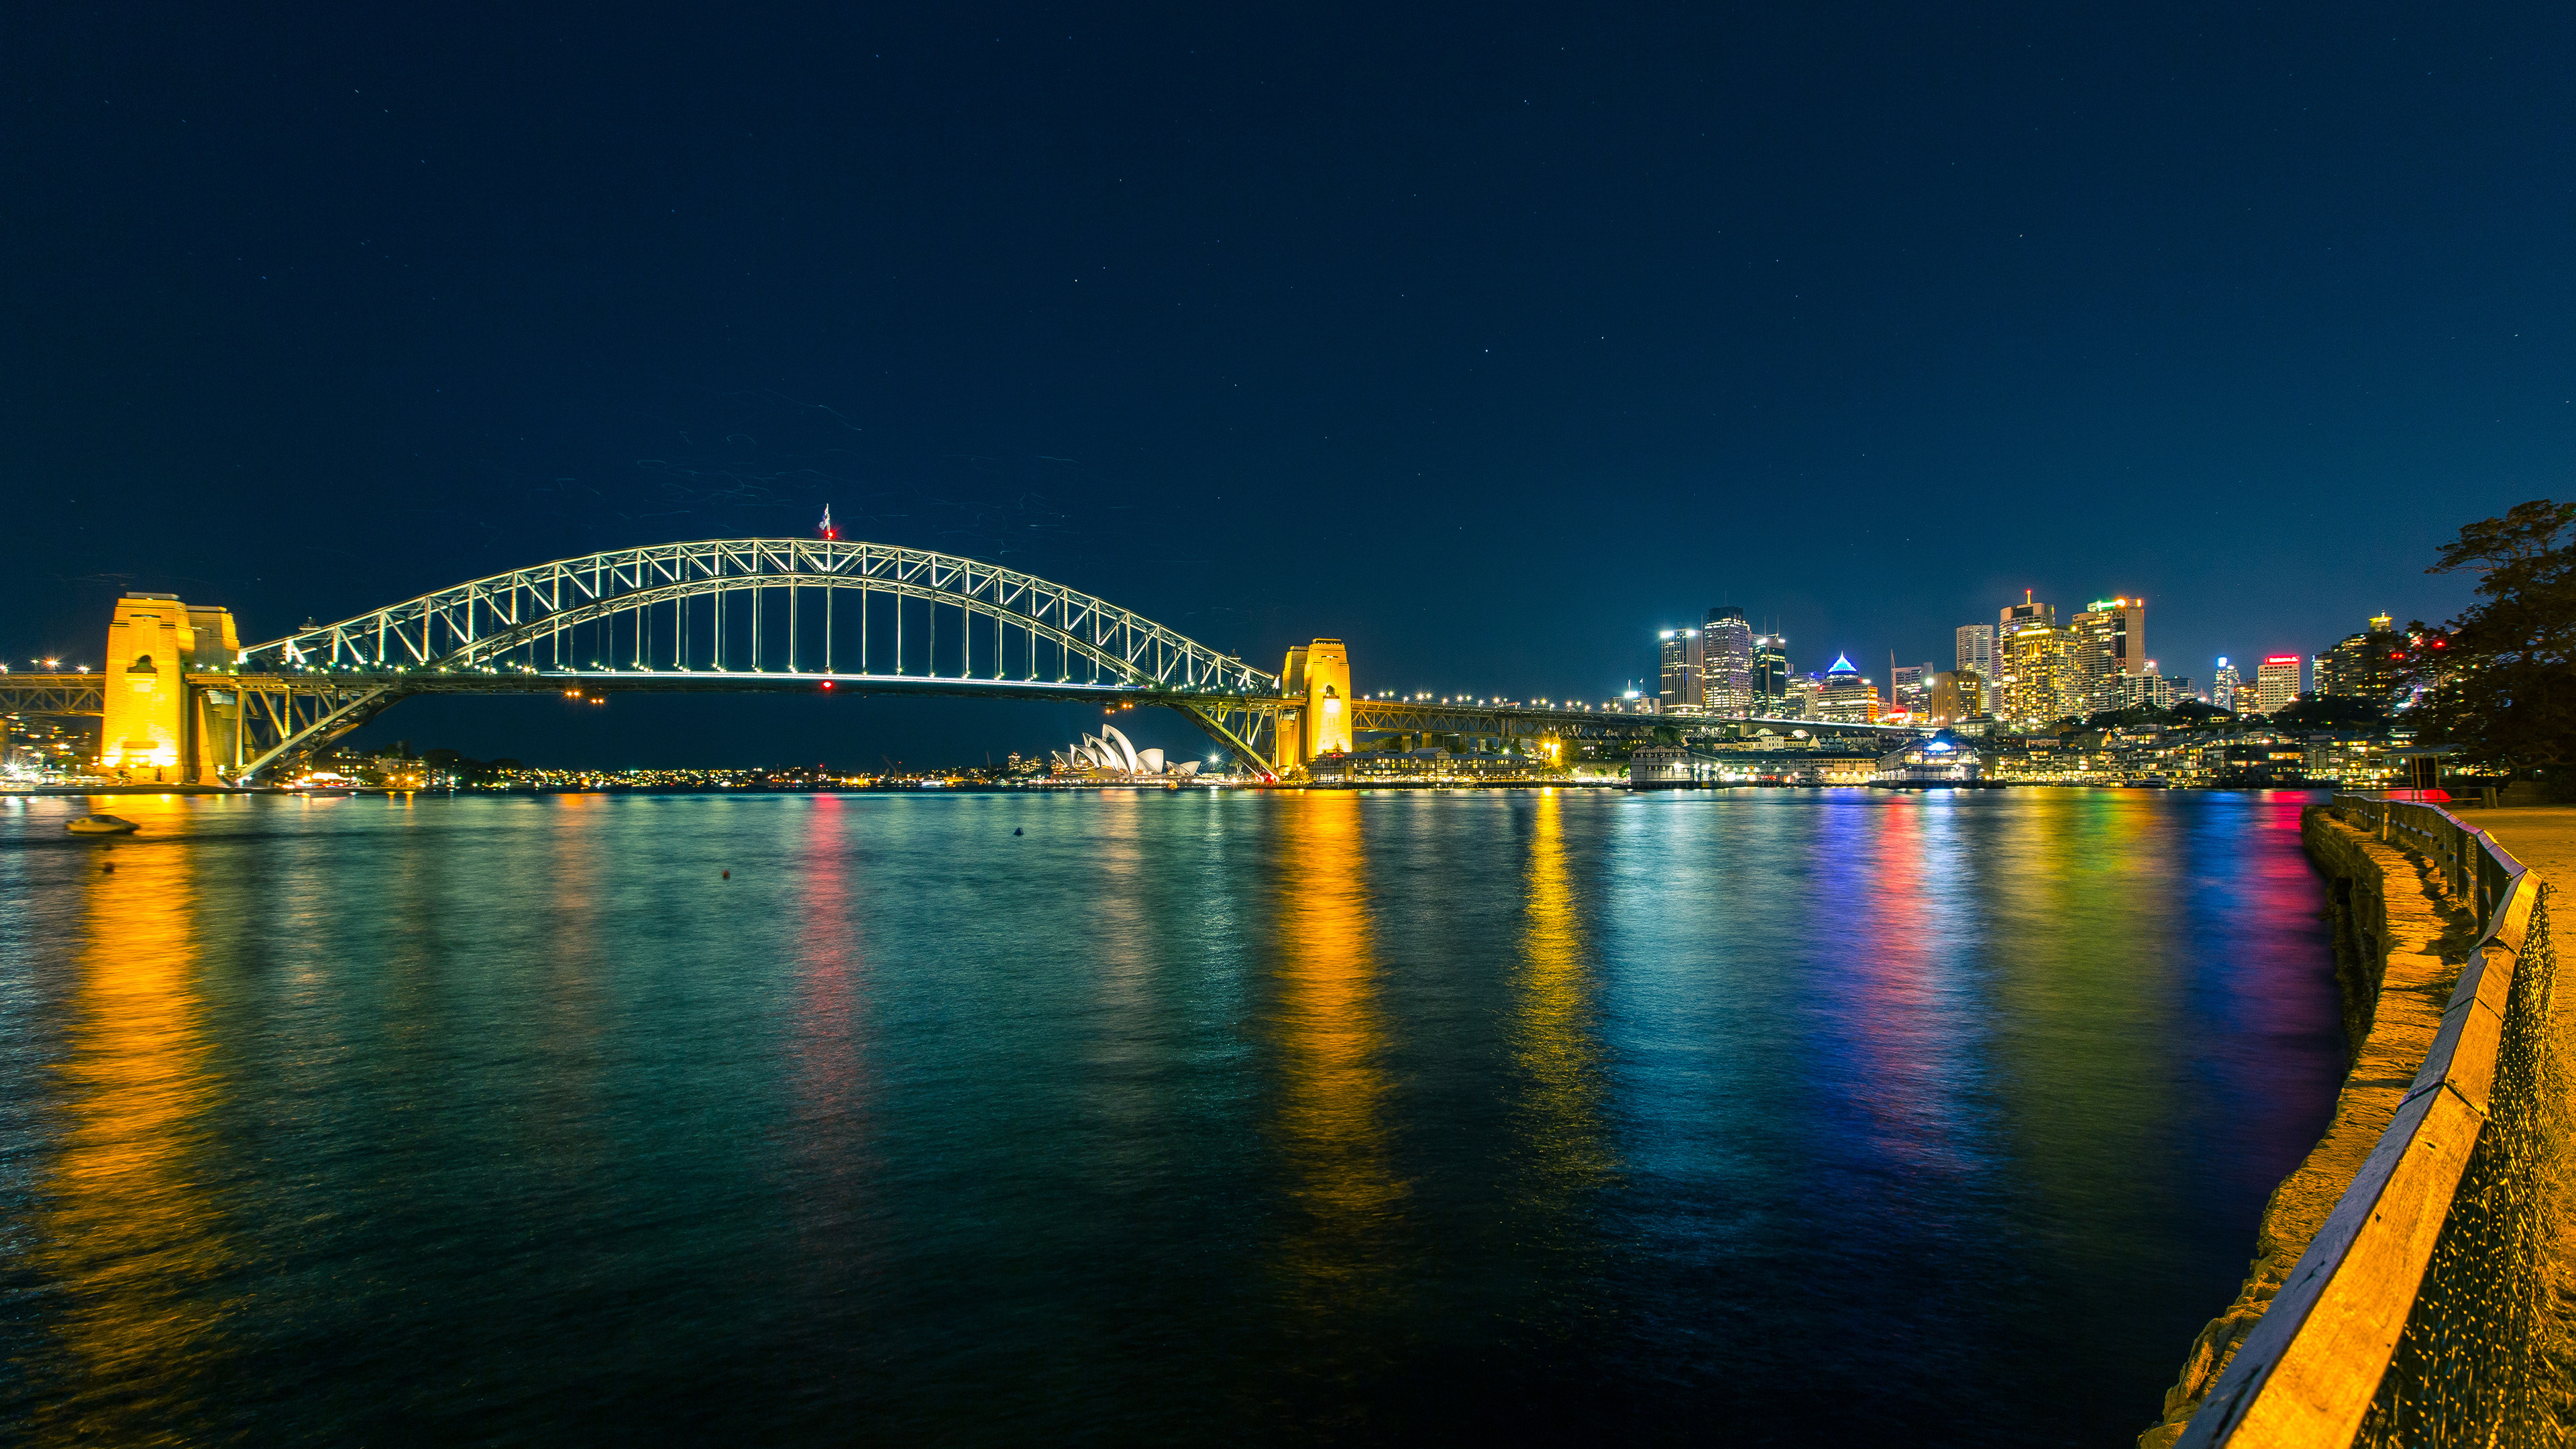 Sydney: The First Fleet of convicts, led by Arthur Phillip, founded the city as a British penal colony. 3840x2160 4K Background.